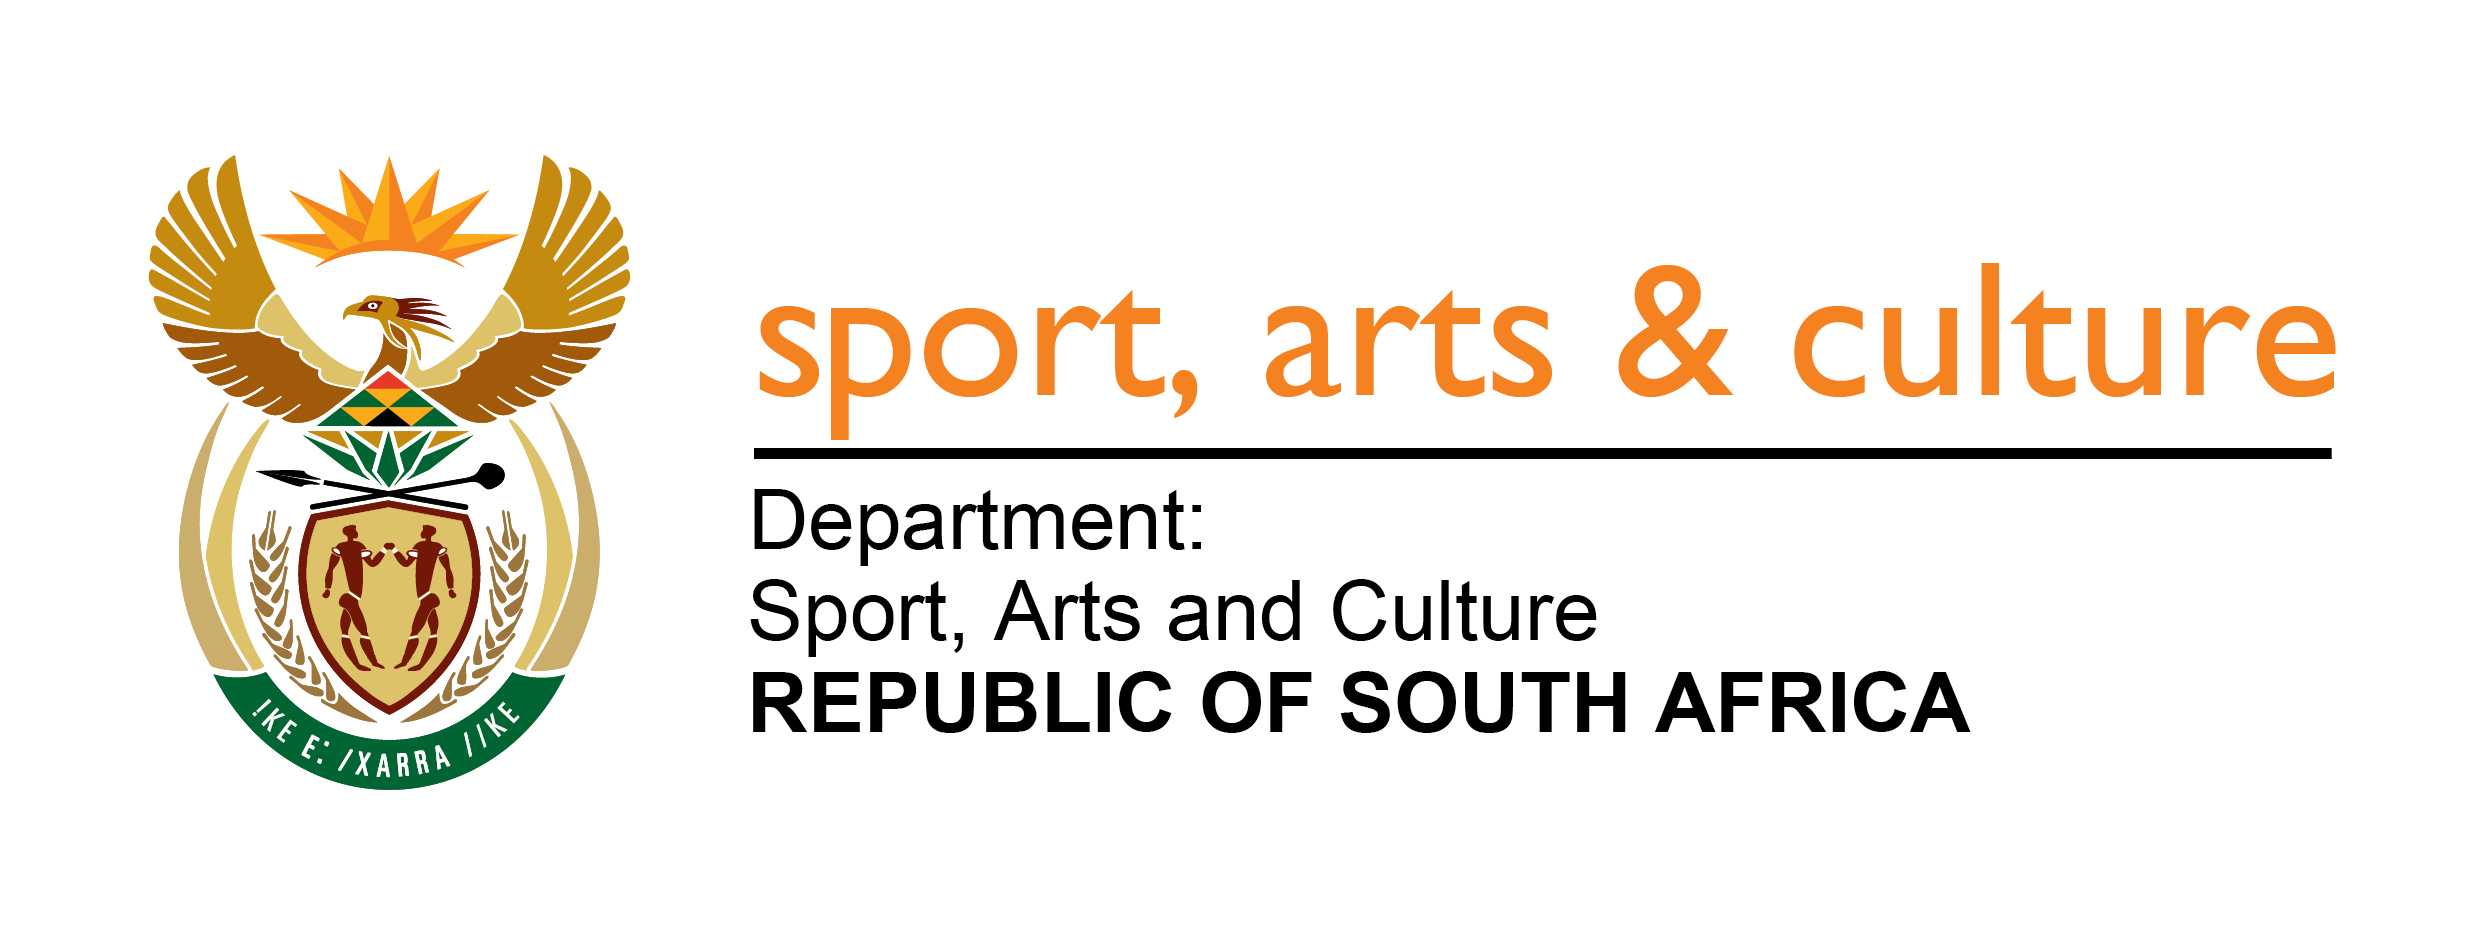 Department of Sport, Arts and Culture logo